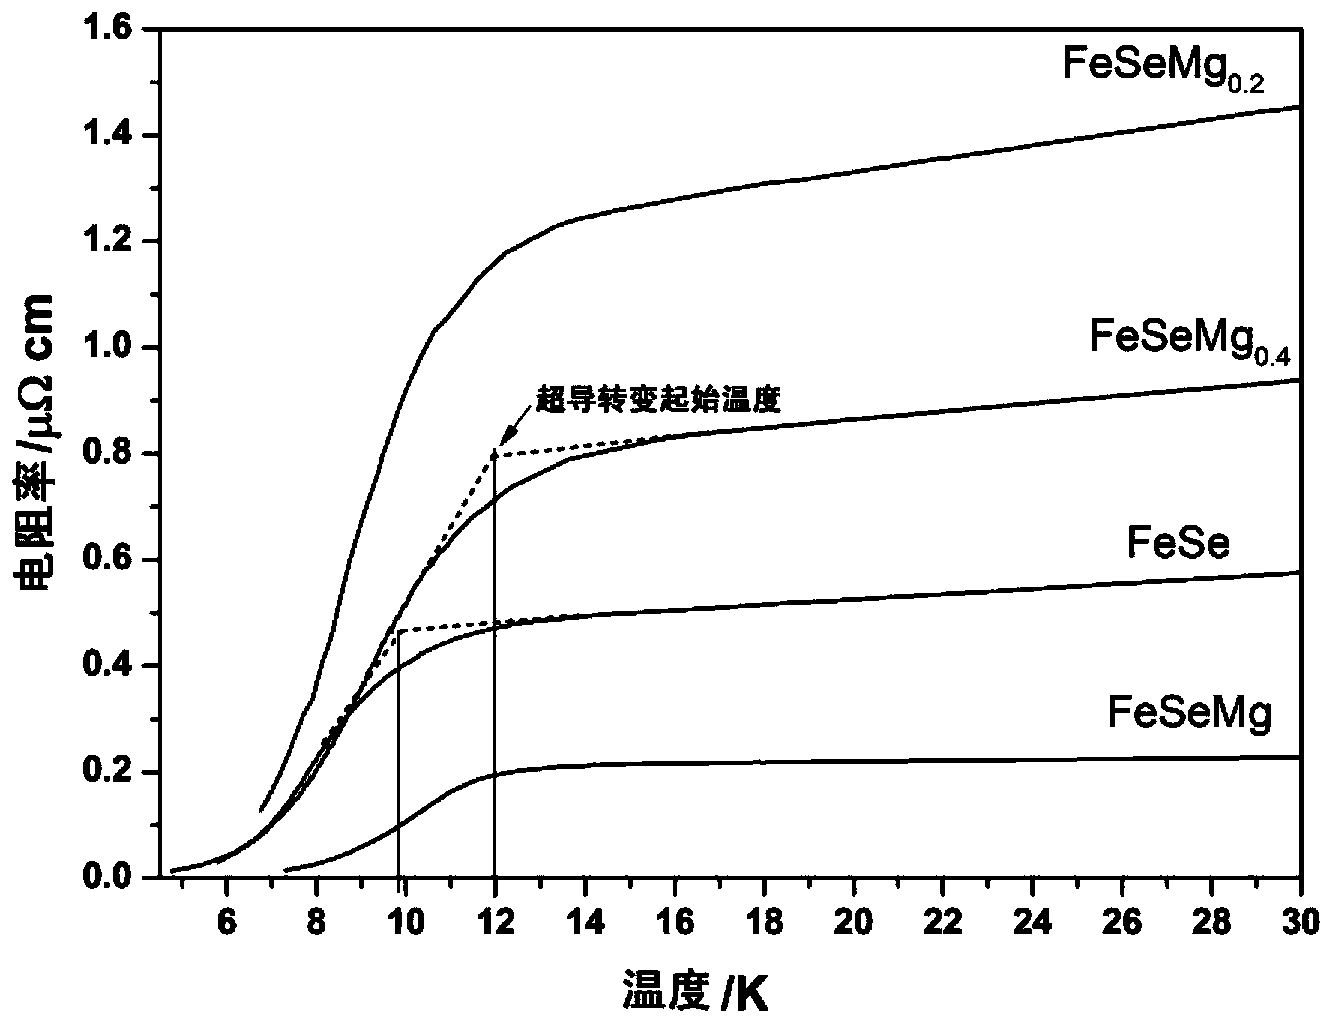 Method for improving FeSe superconducting transition temperature by adding Mg